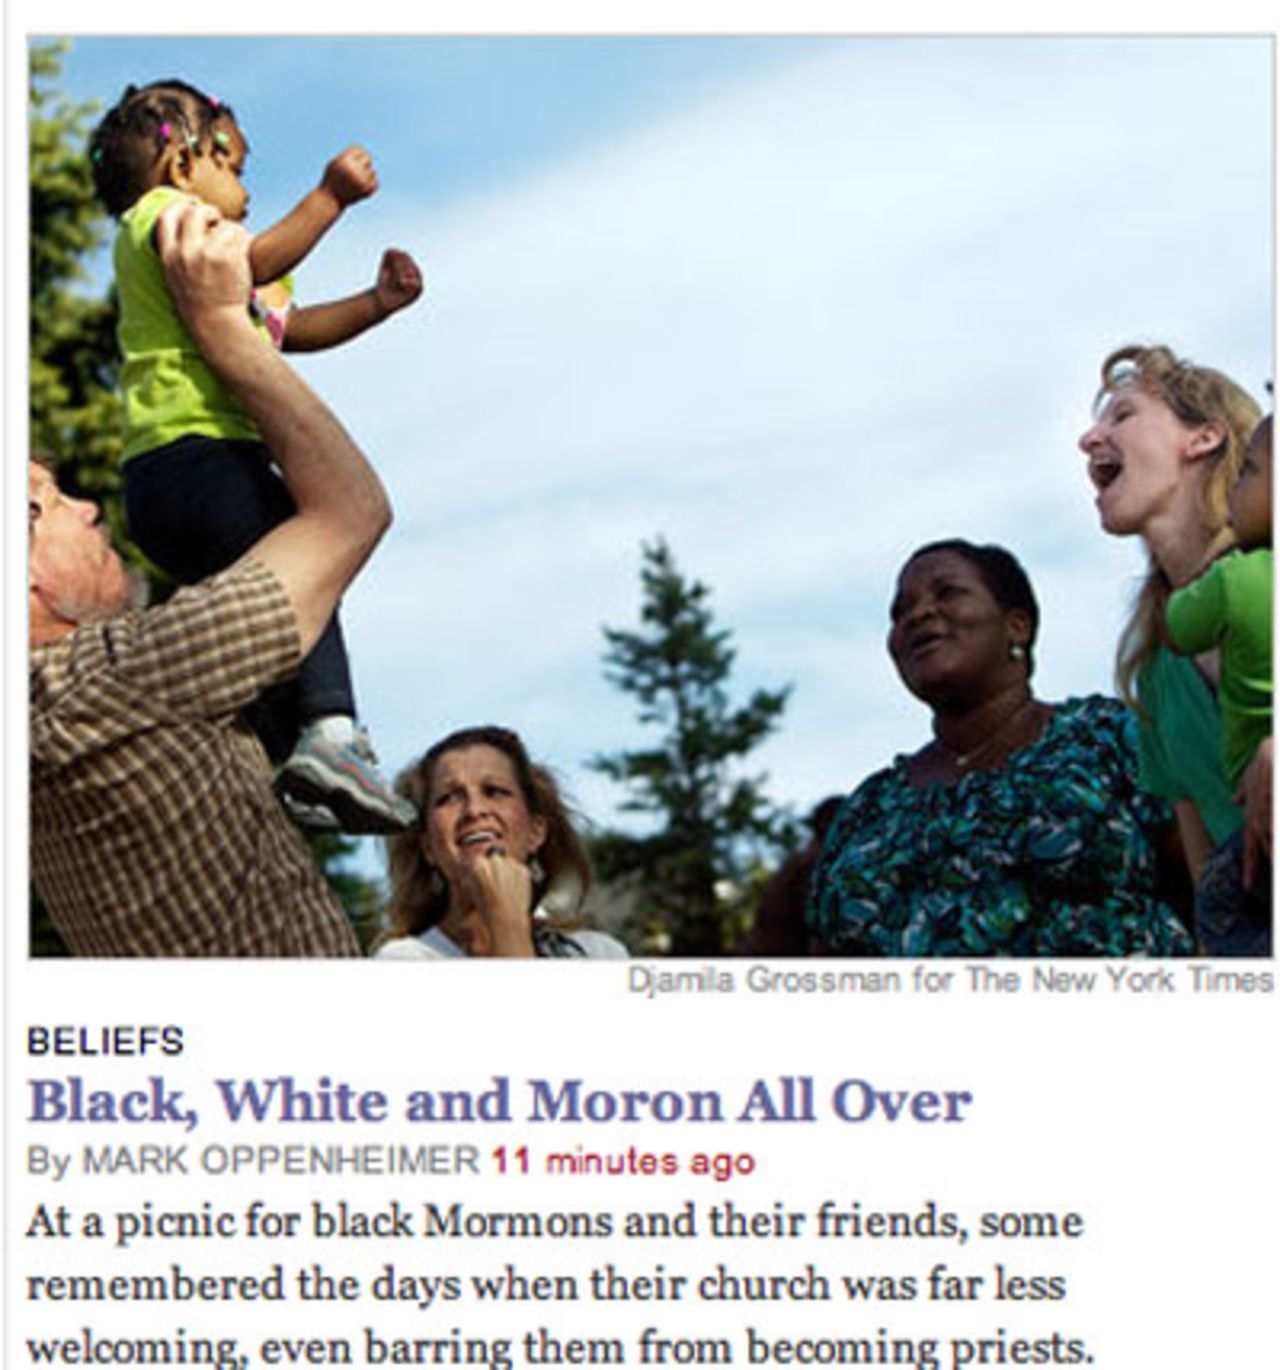 This headline from The New York Times shows what a difference a copy editor can make.